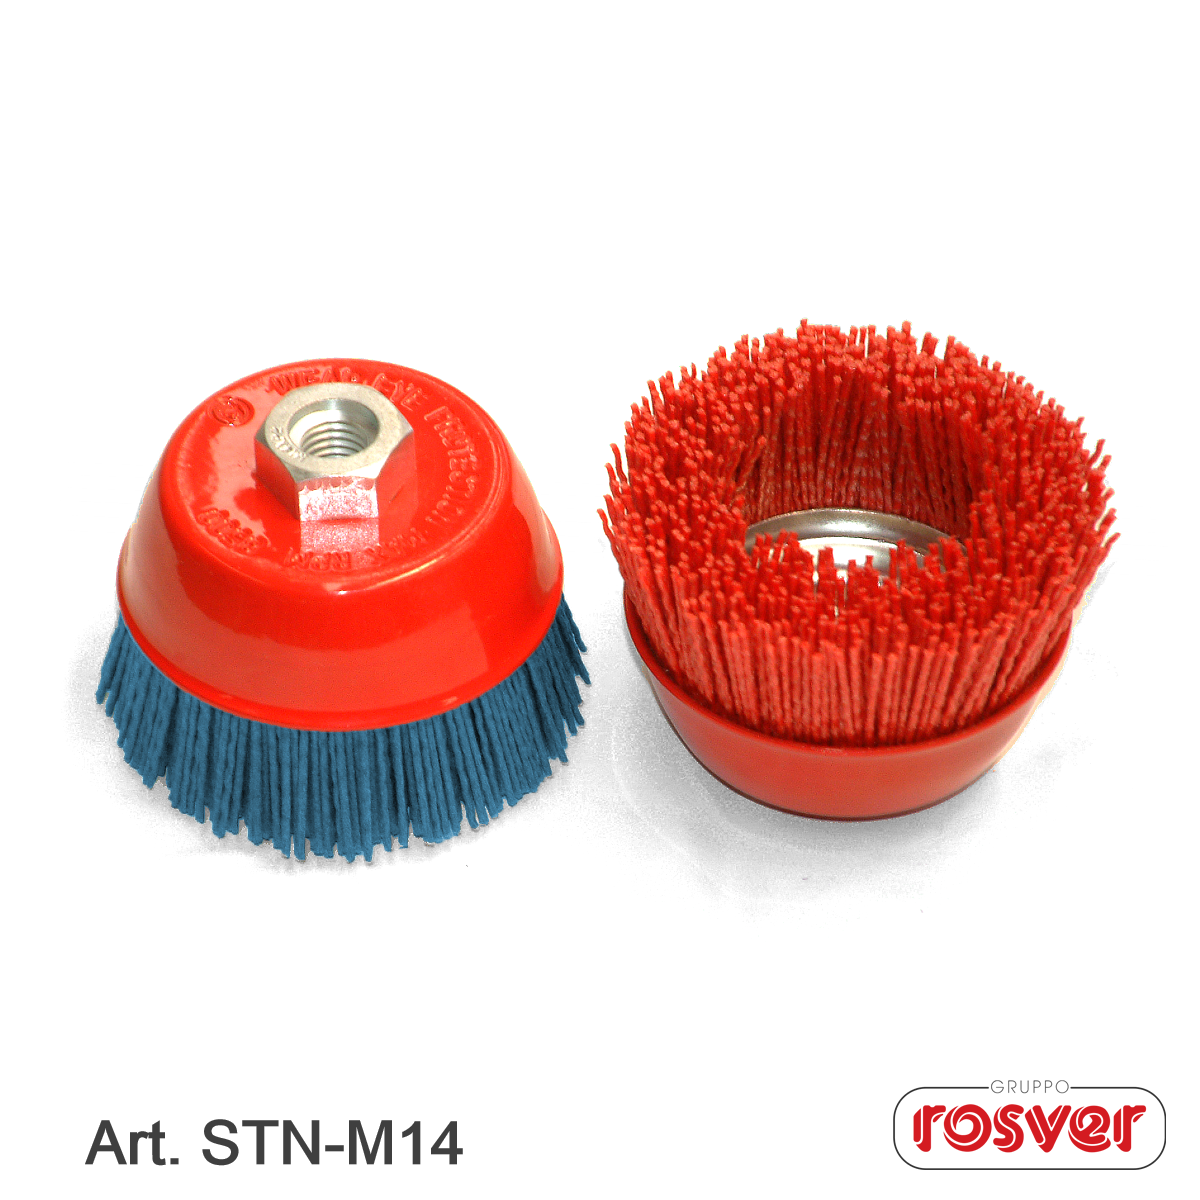 Nylon Cup Brushes M14 - Rosver - STN D.80 F.M14 - Conf.1pz